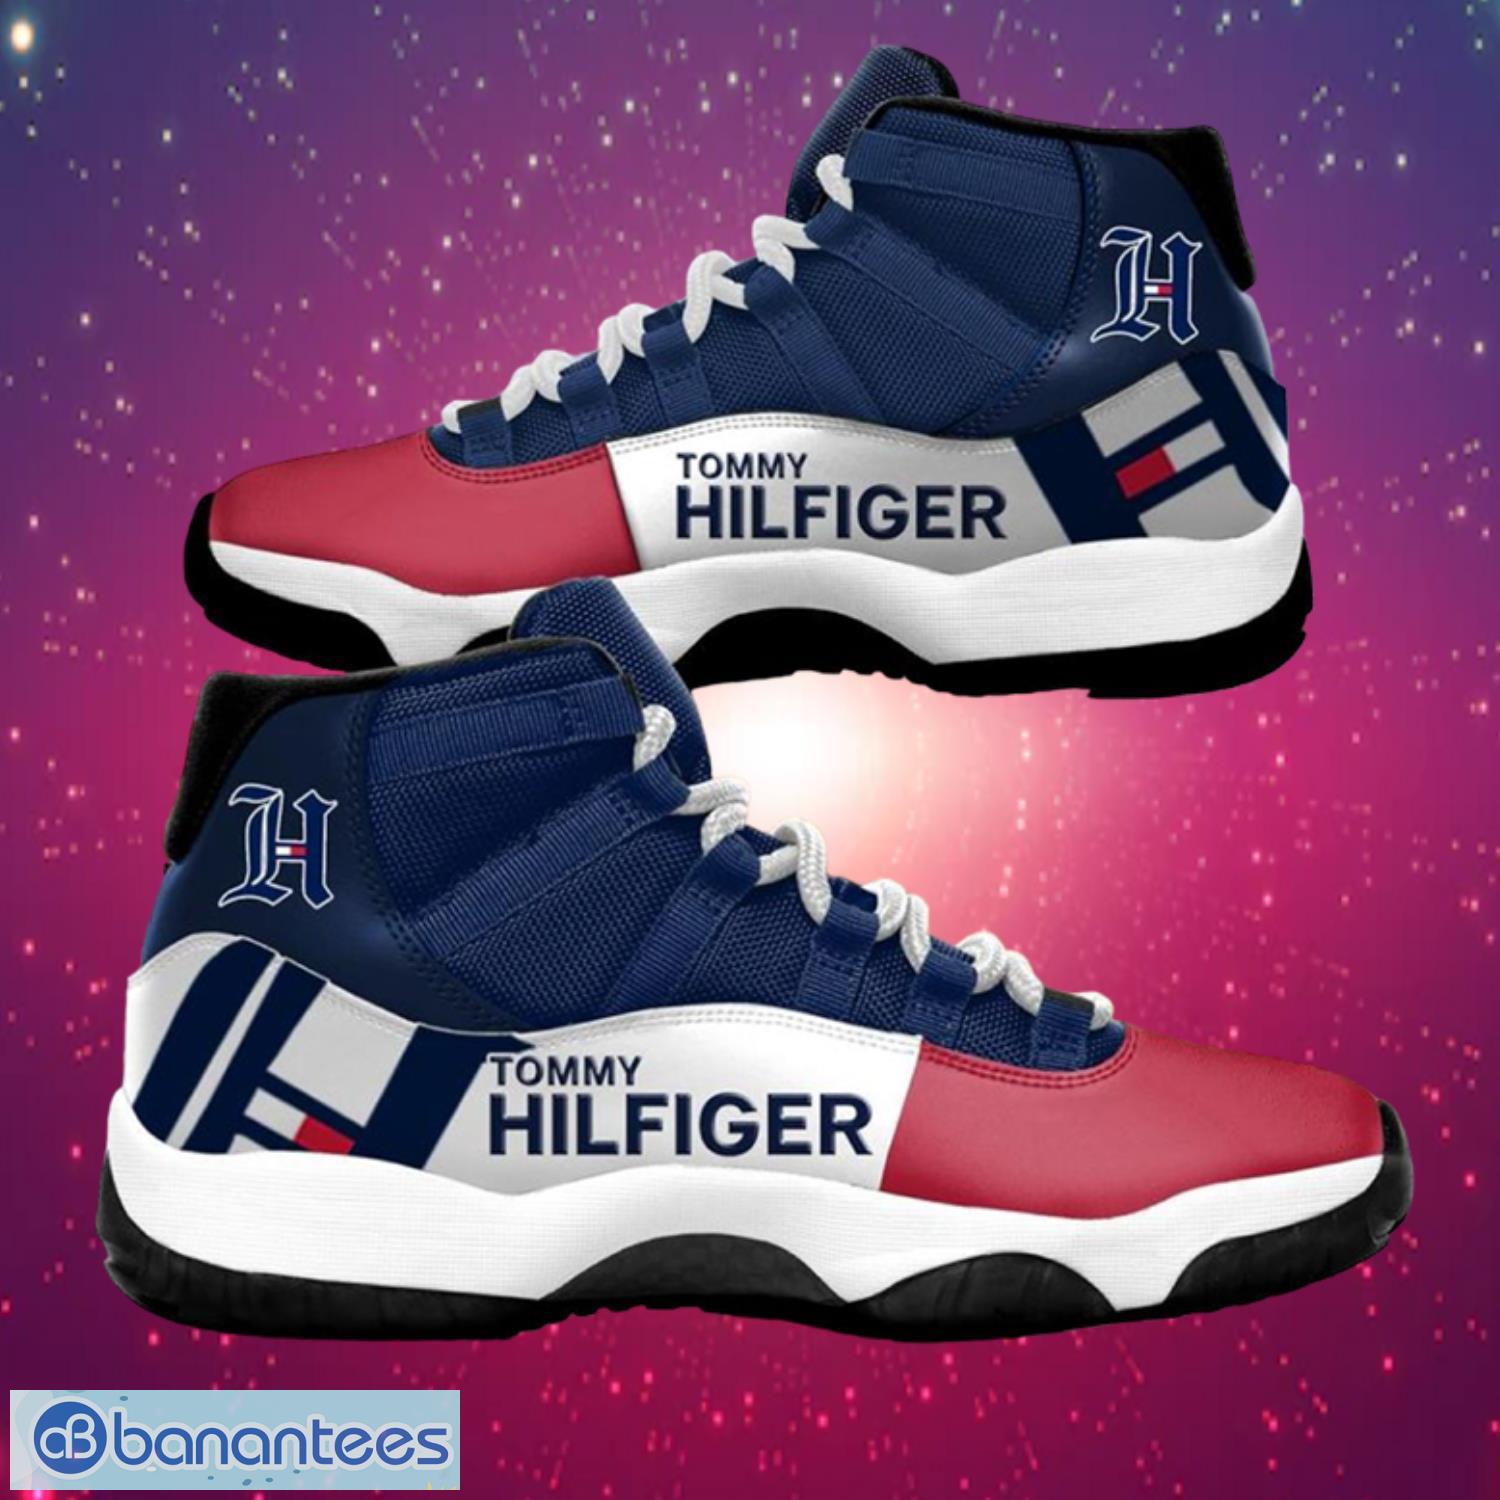 Tommy Hilfiger White Red Luxury Air Jordan 11 Shoes - Banantees